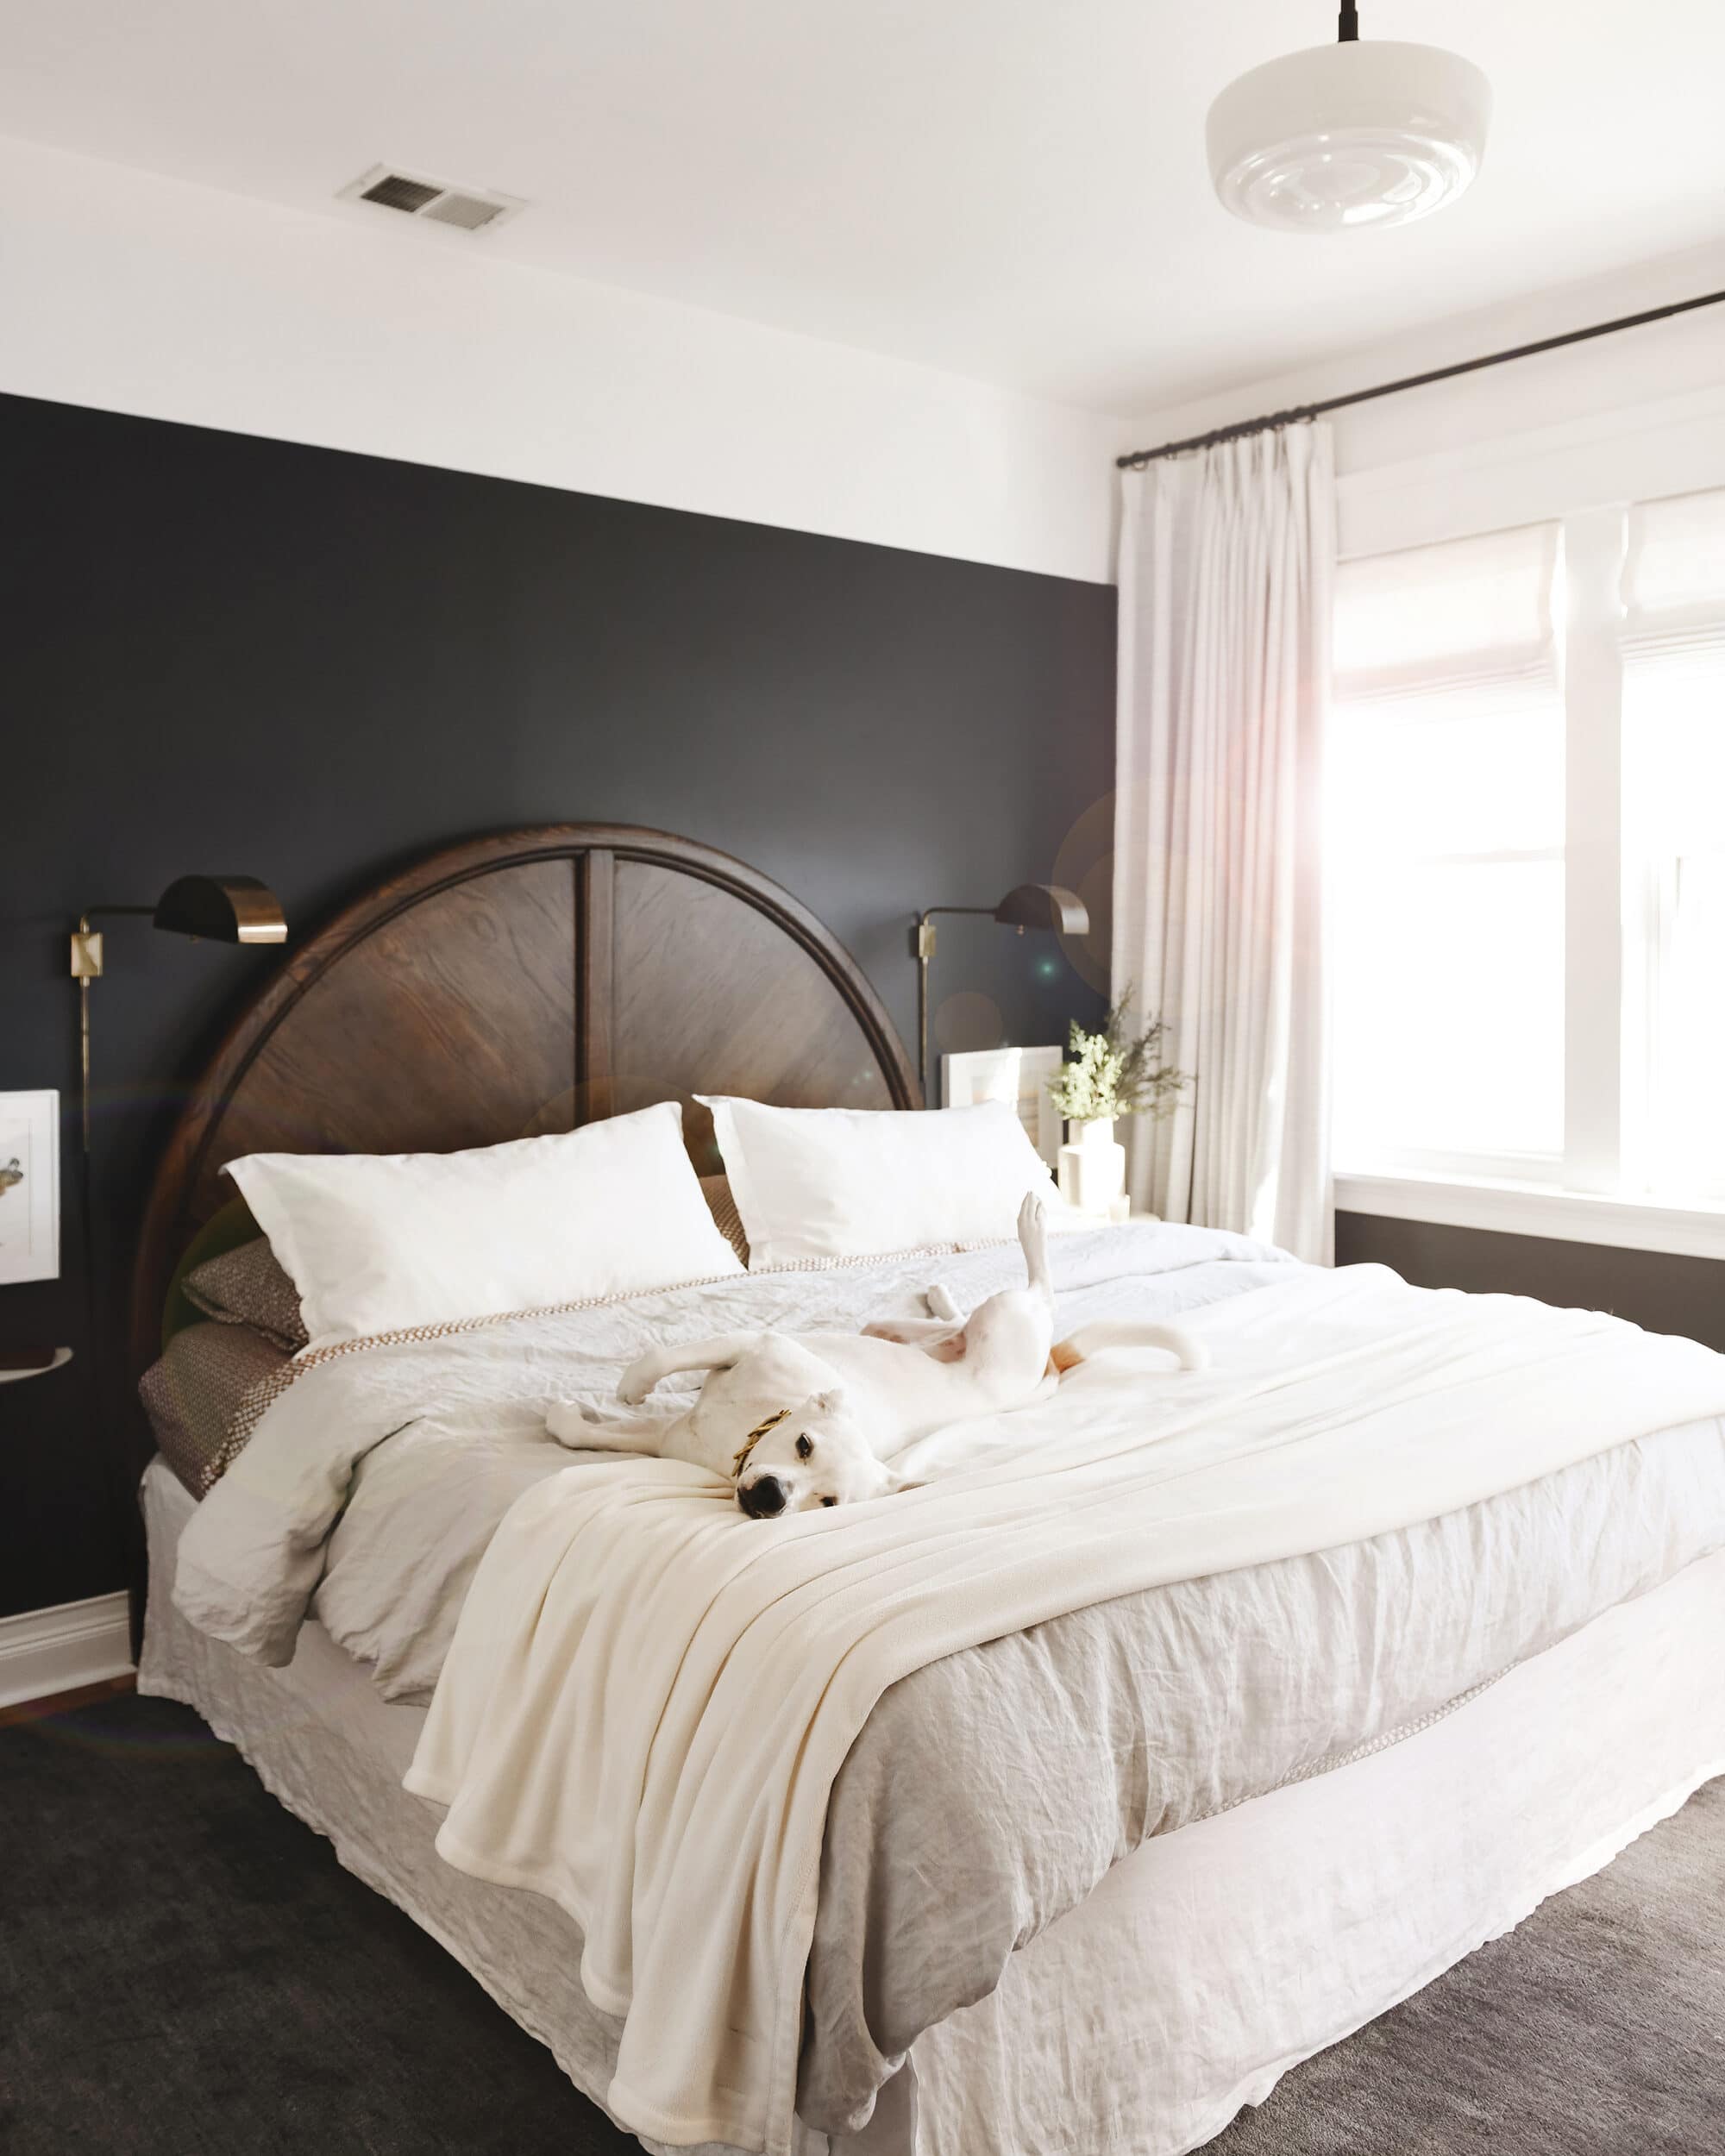 Dark and moody bedroom with natural light // via Yellow Brick Home